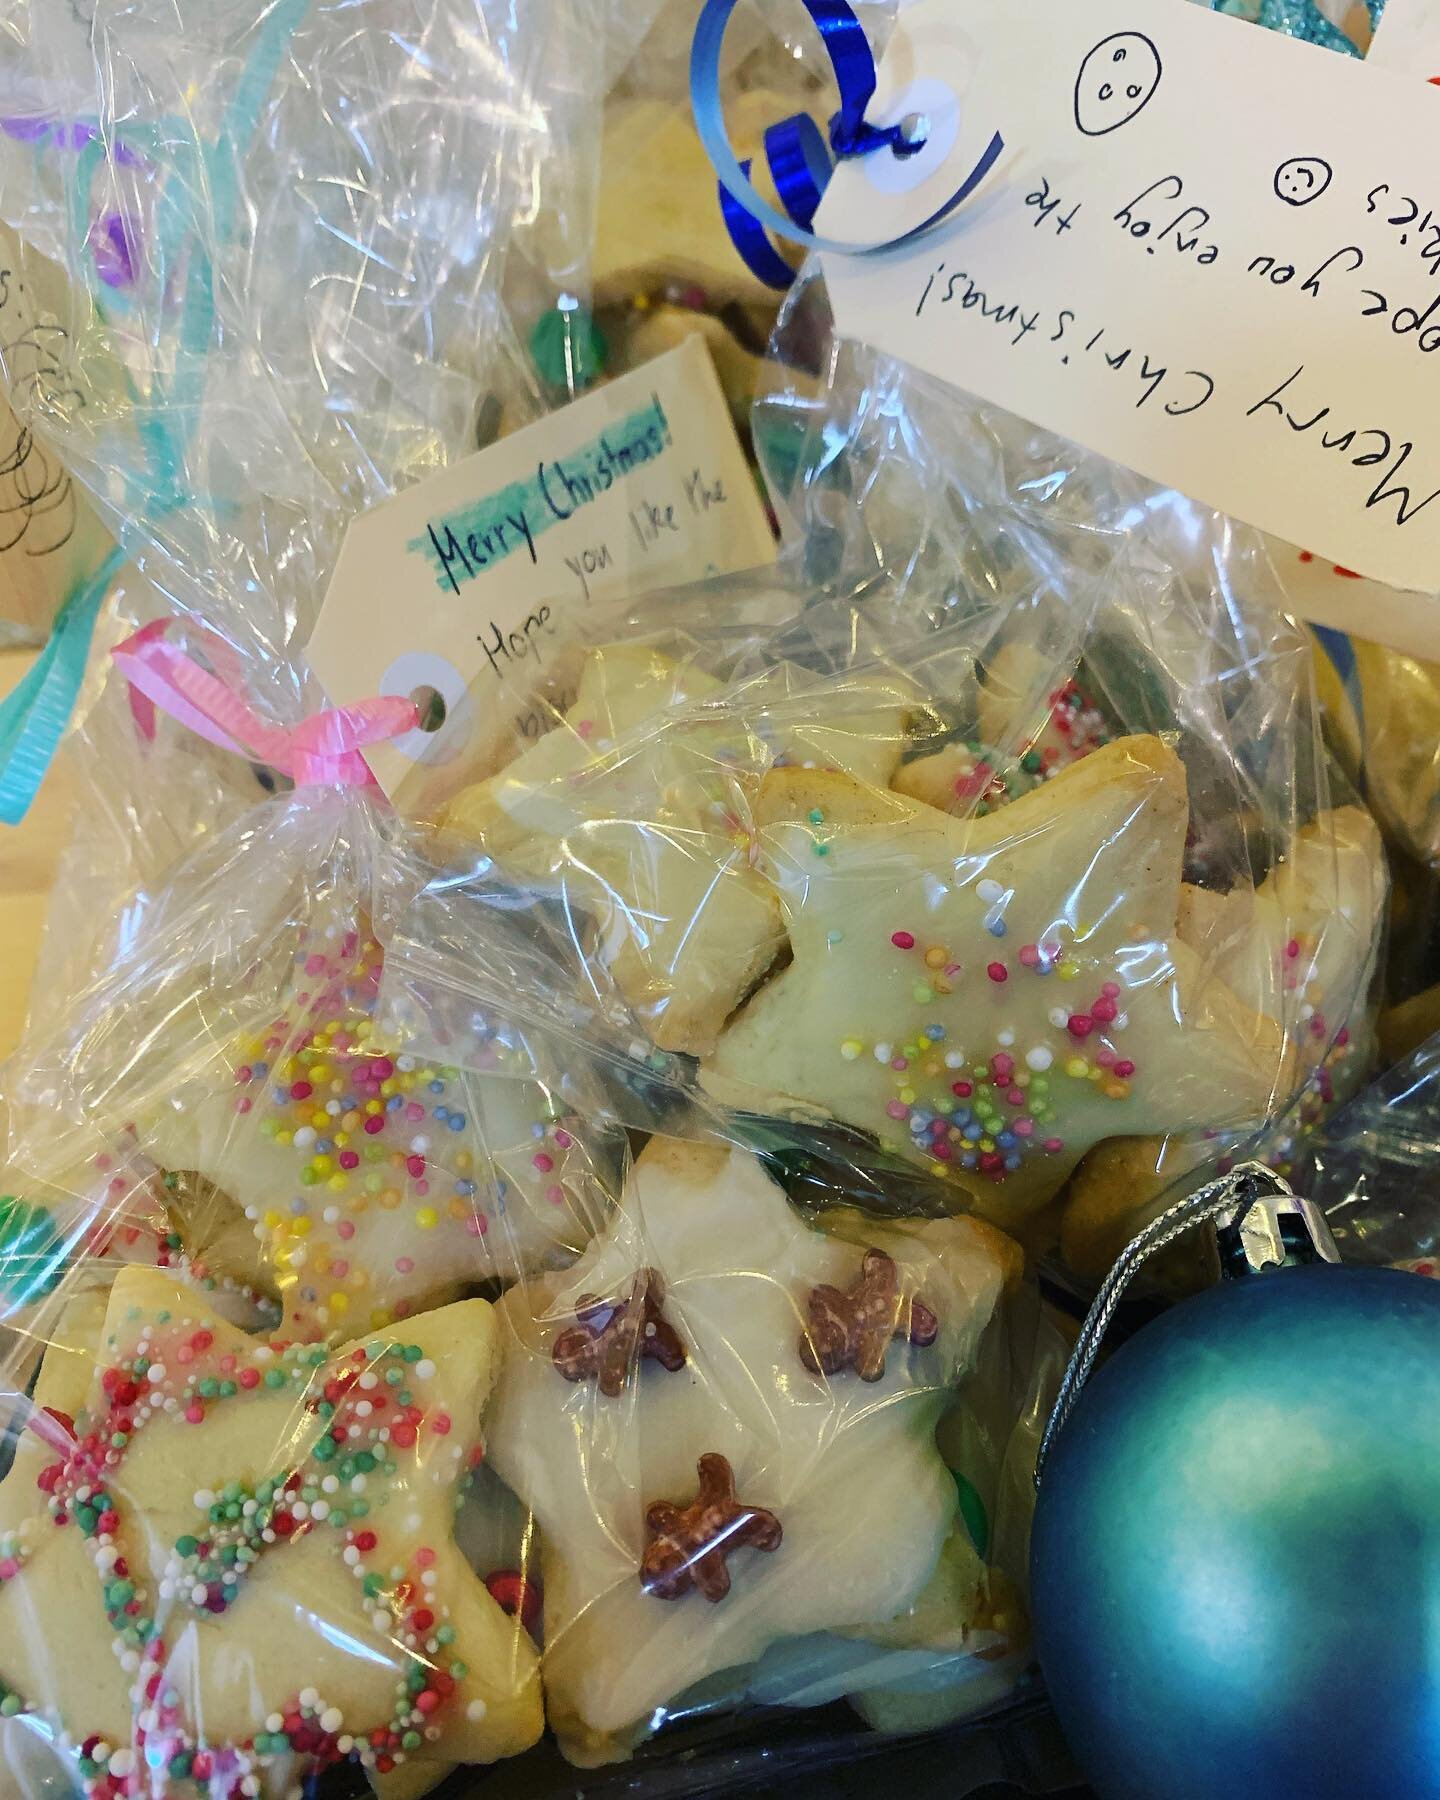 How professional and scrumptious do these cookies look??!! Thank- you to Shelford Girls Grammar for taking the time to make these cookies and attaching hand written Christmas notes - helping to spread joy this Christmas to people struggling in our co